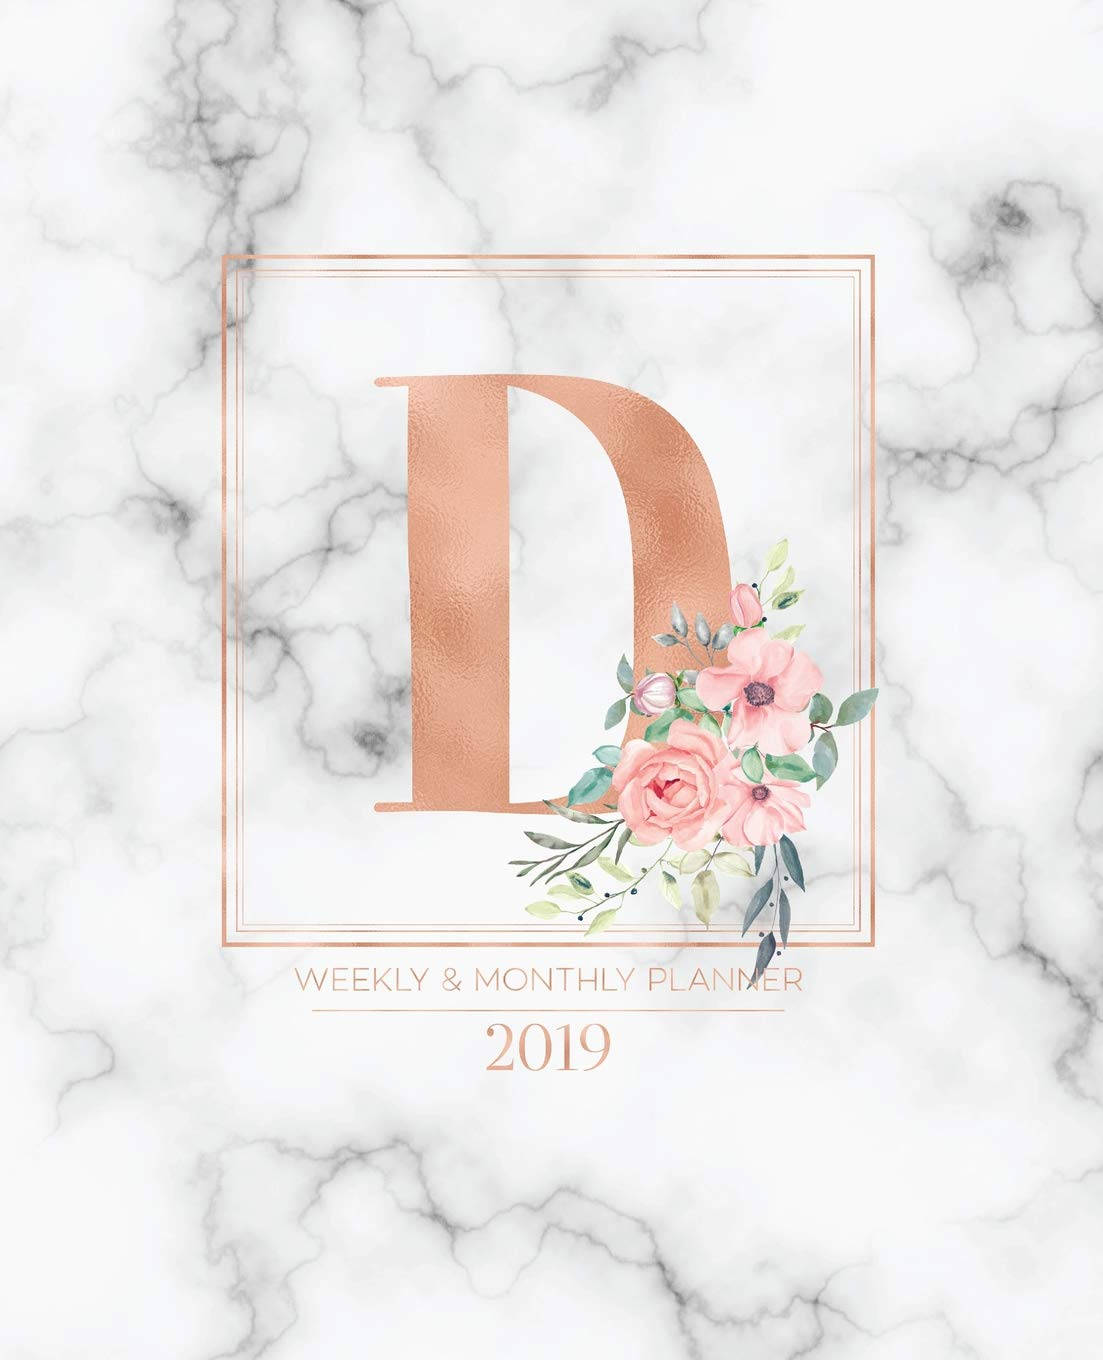 Fancy Letter D On Marble Background